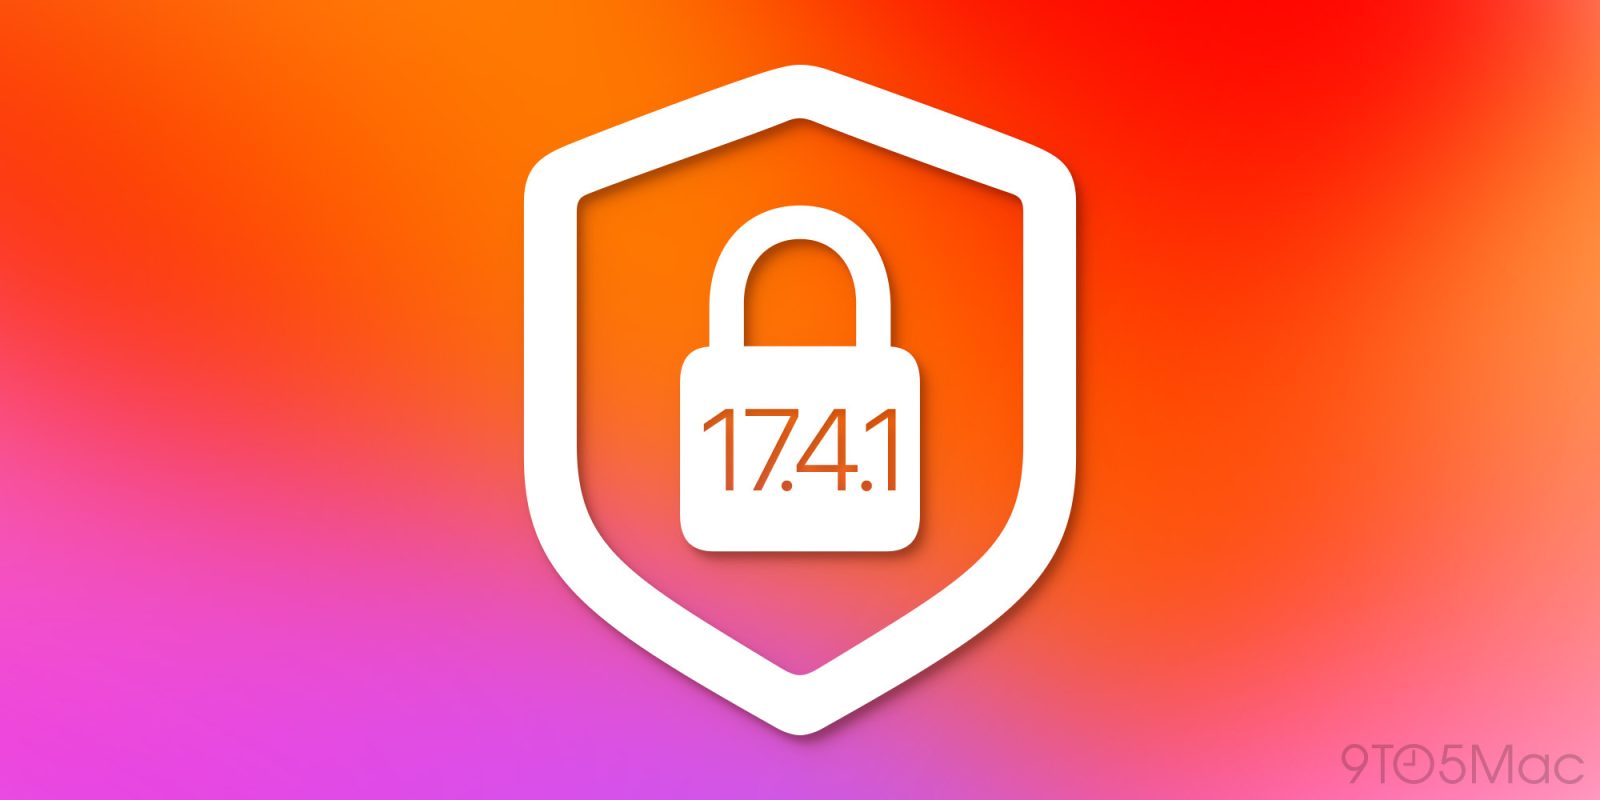 Security Bite: Here’s why Apple is being vague with iOS 17.4.1 details